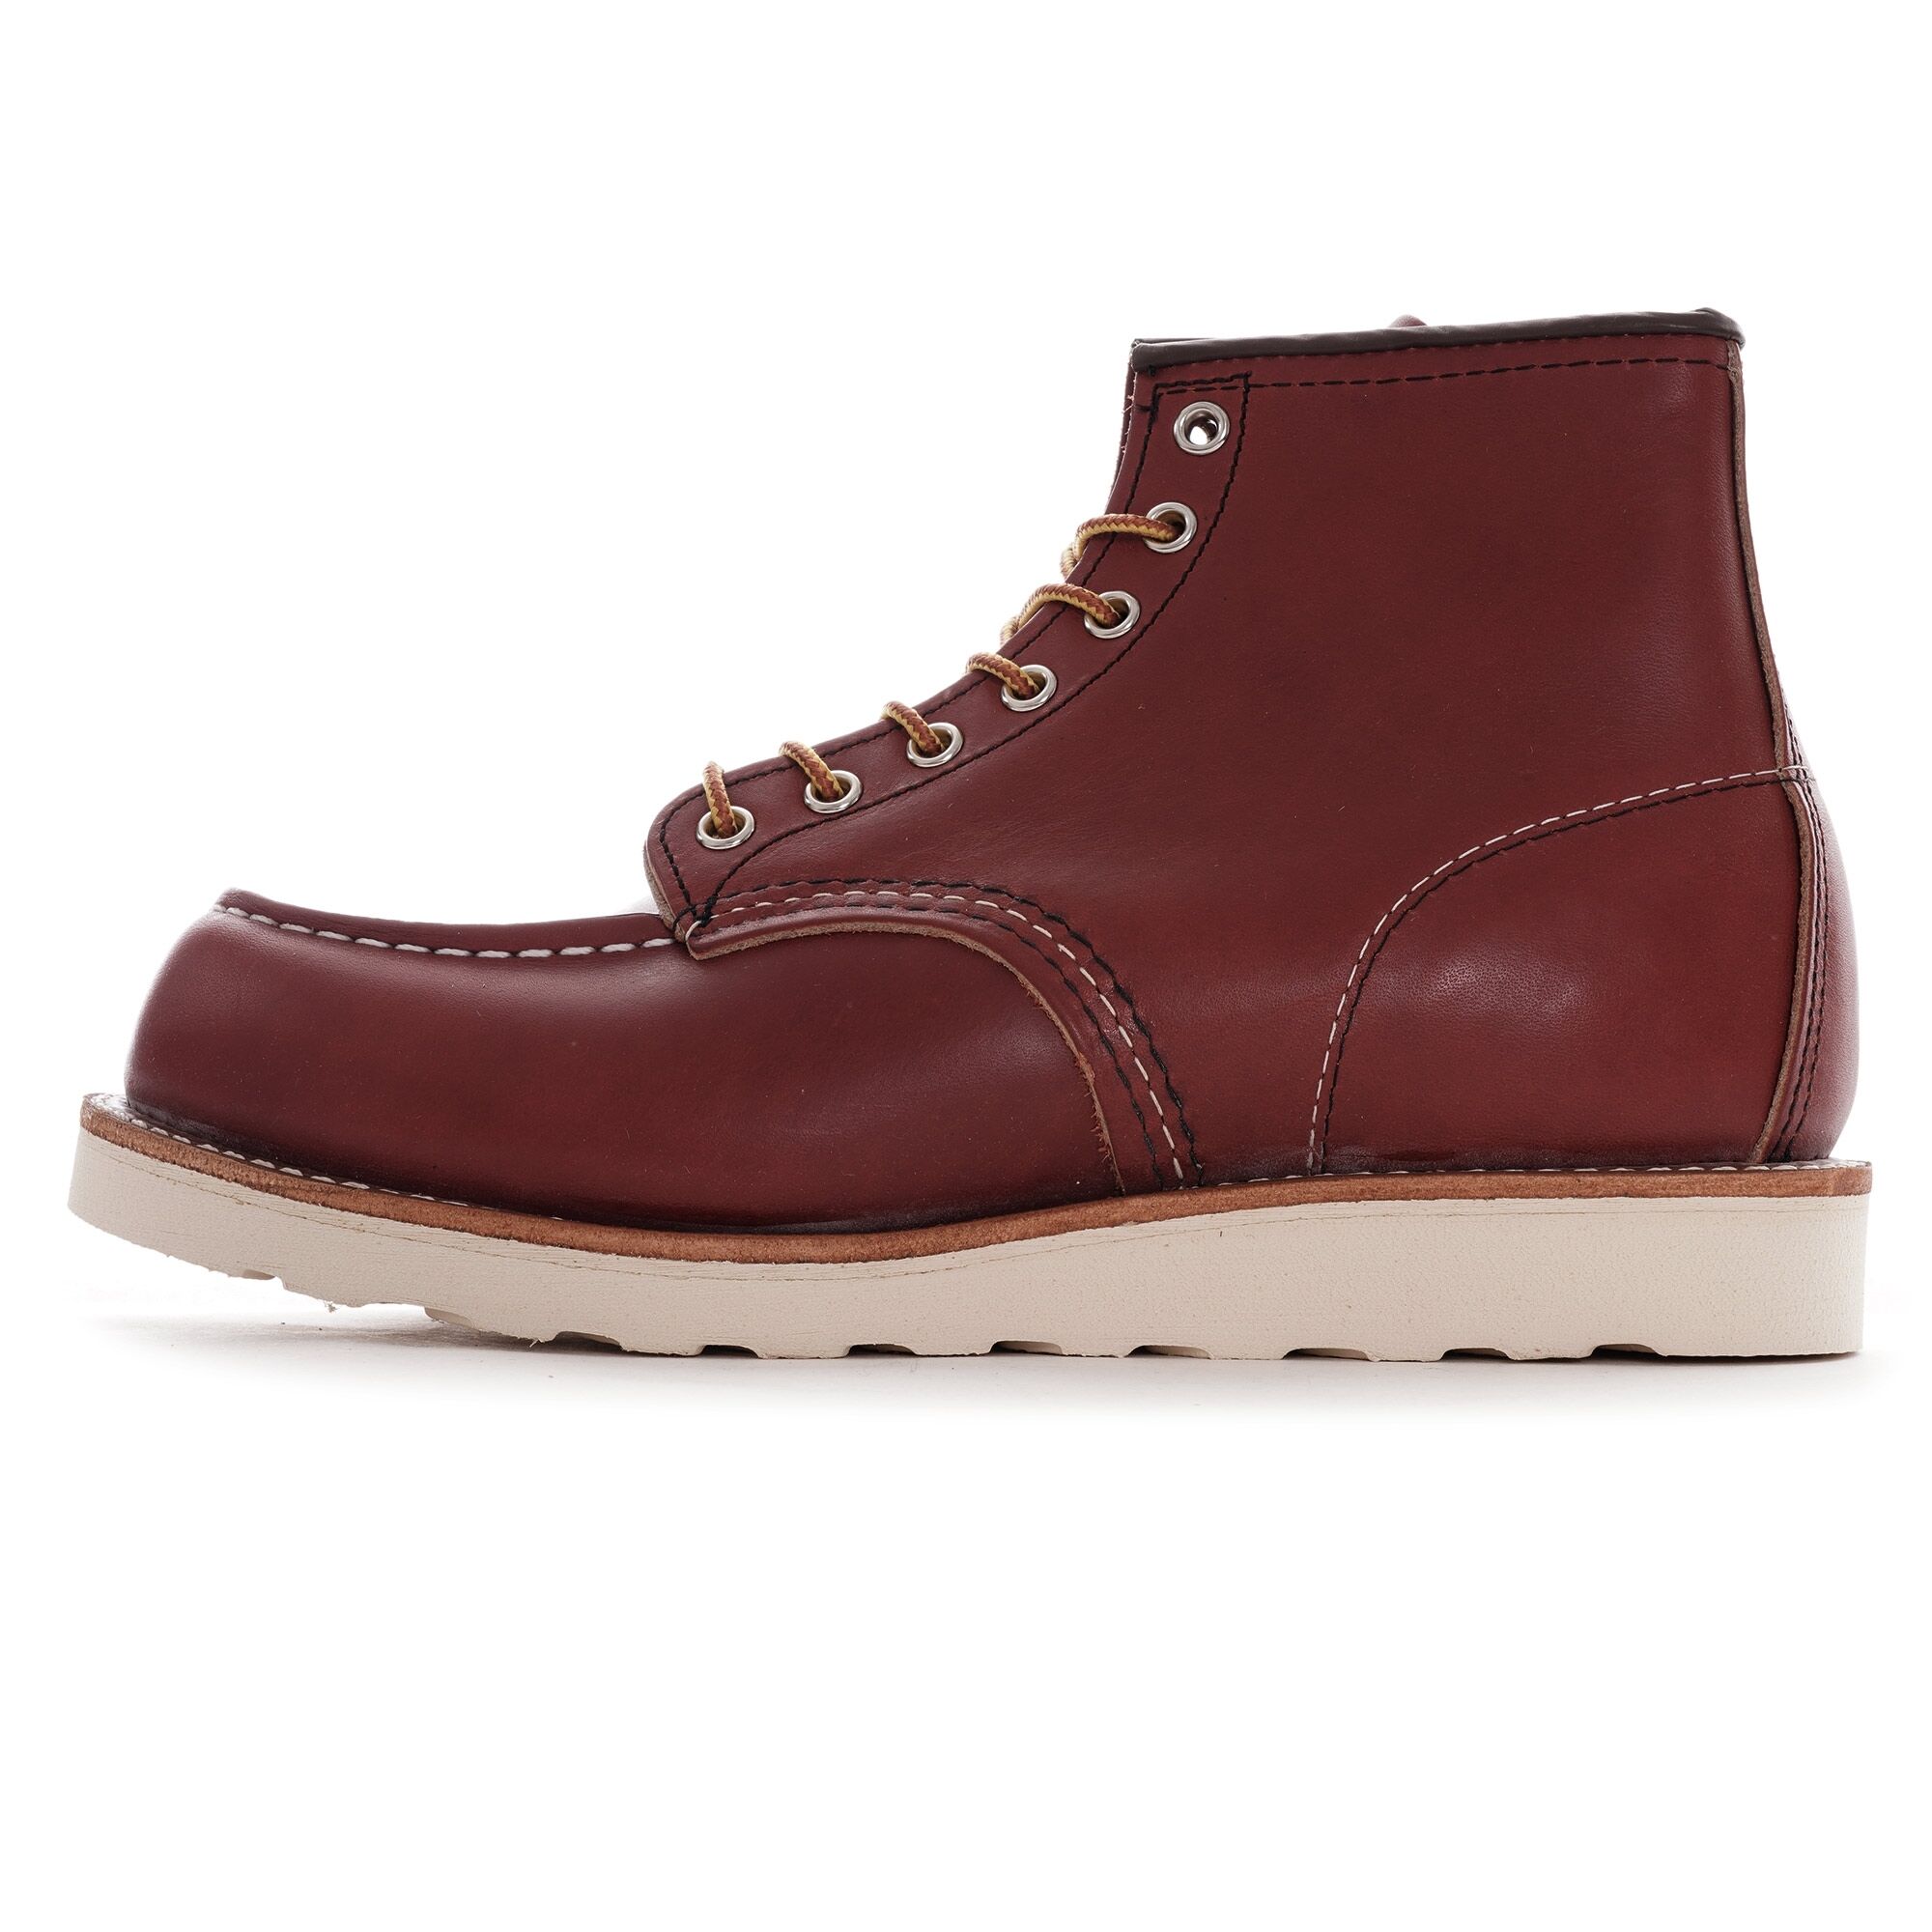 Red Wing Classic Moc Toe Boot - Briar - 8875D-BRN 6 BOOT Colour: Brown - Brown - male - Size: UK 7